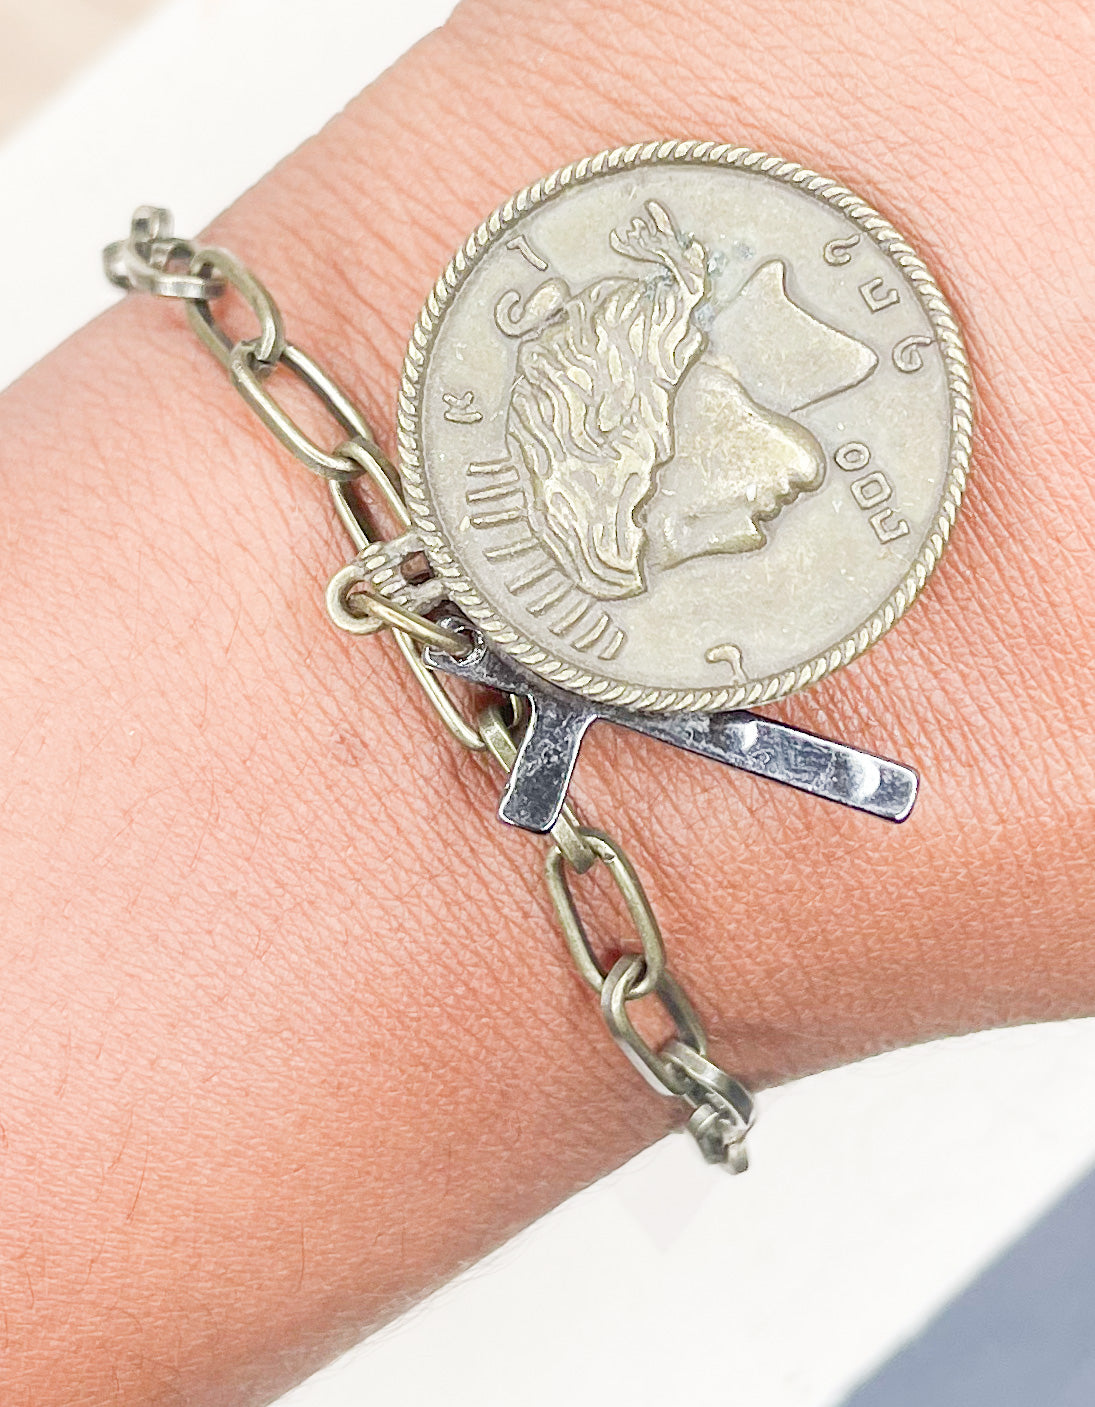 Load image into Gallery viewer, Grunge Coin Bracelet - Dainty Grunge
